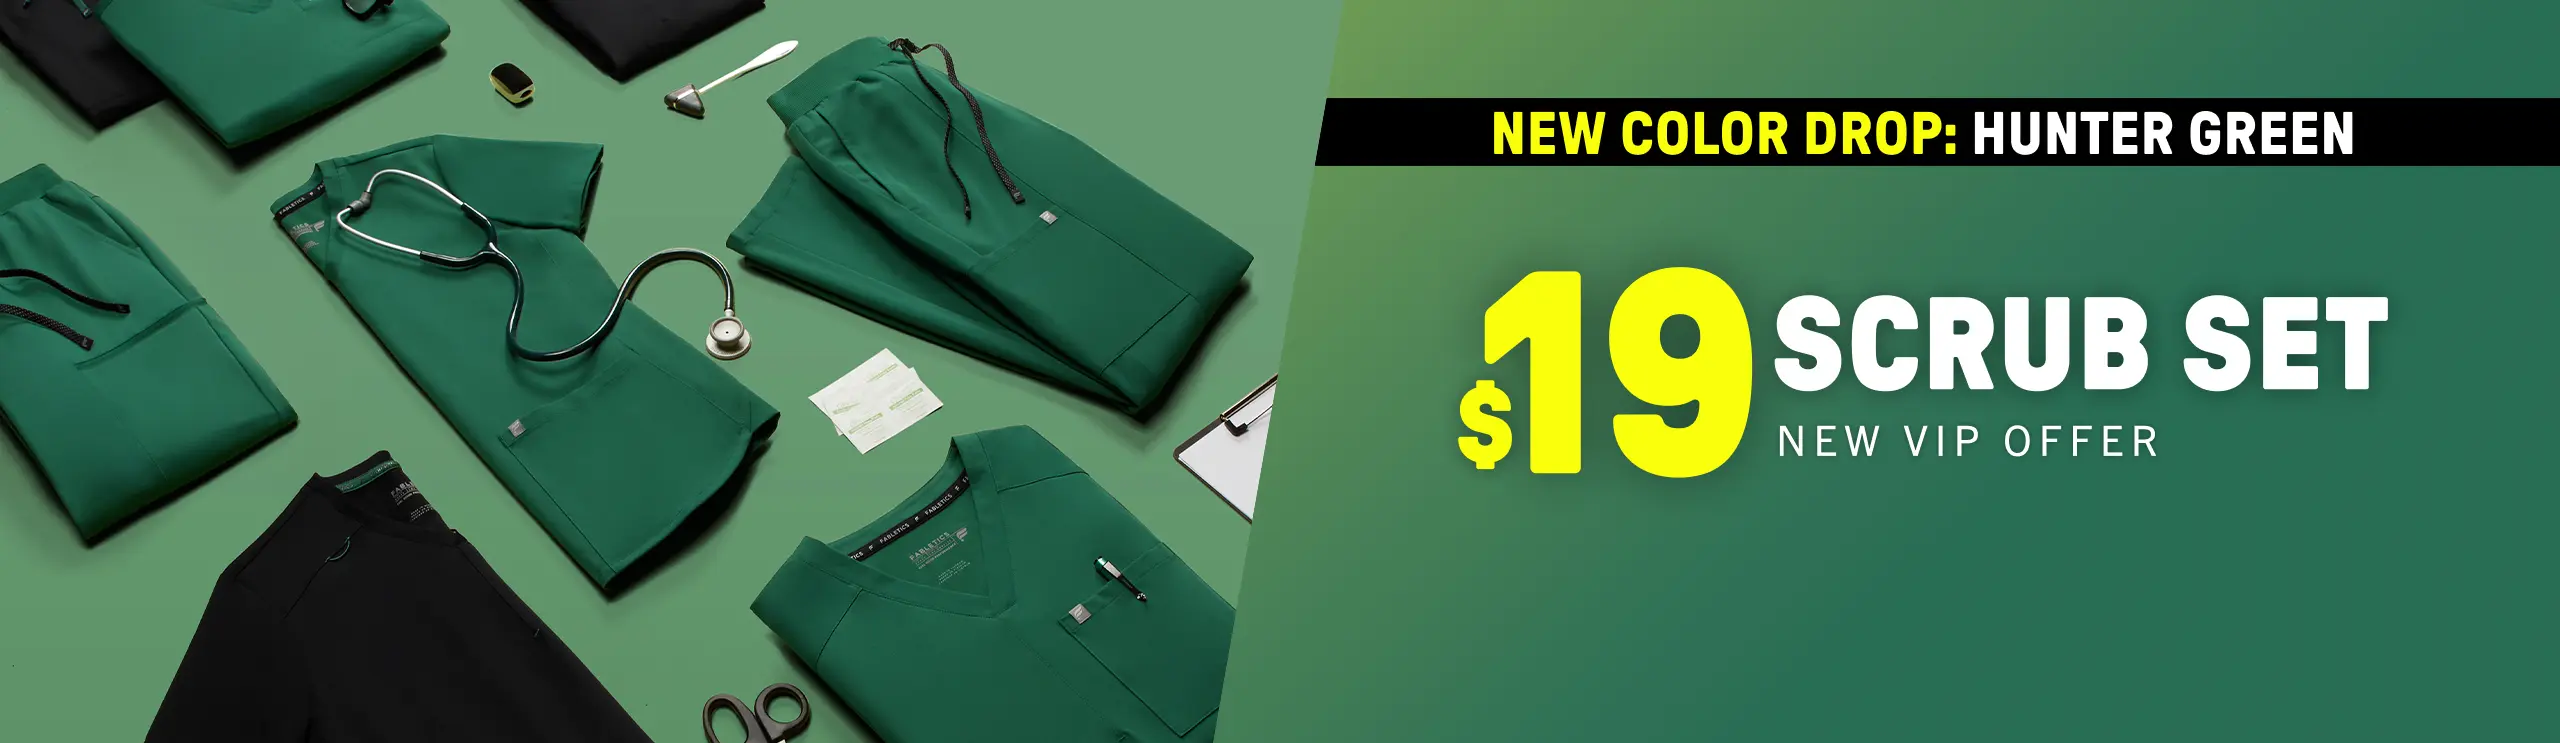 New color drop! Hunter Green. Get your first scrub set for $19 when you checkout as a new VIP member.